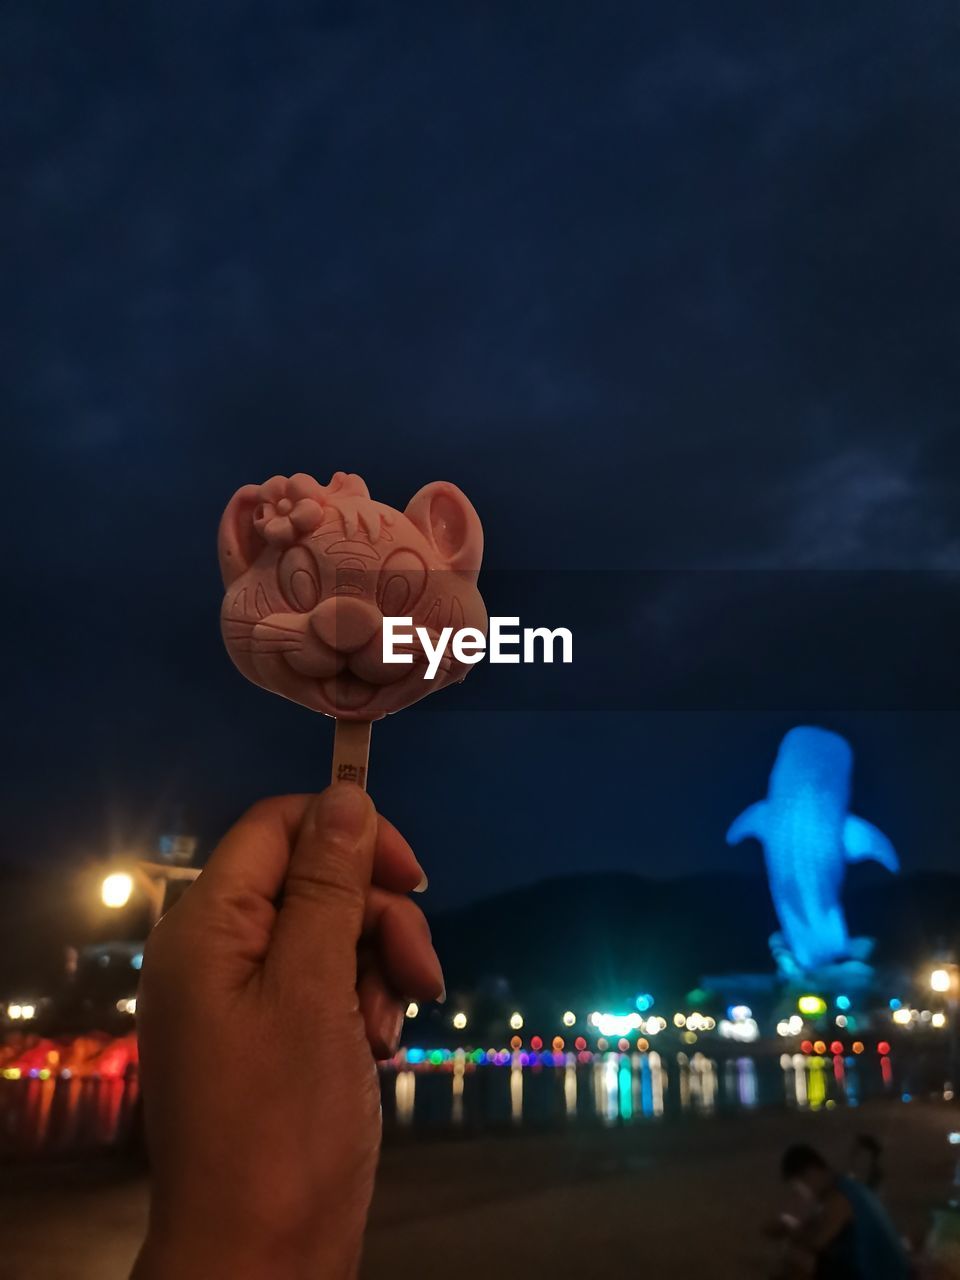 hand, sky, night, holding, illuminated, cloud, celebration, light, emotion, positive emotion, city, nature, blue, lighting, food and drink, architecture, one person, sweet food, personal perspective, event, adult, sweet, outdoors, love, focus on foreground, lighting equipment, food, heart shape